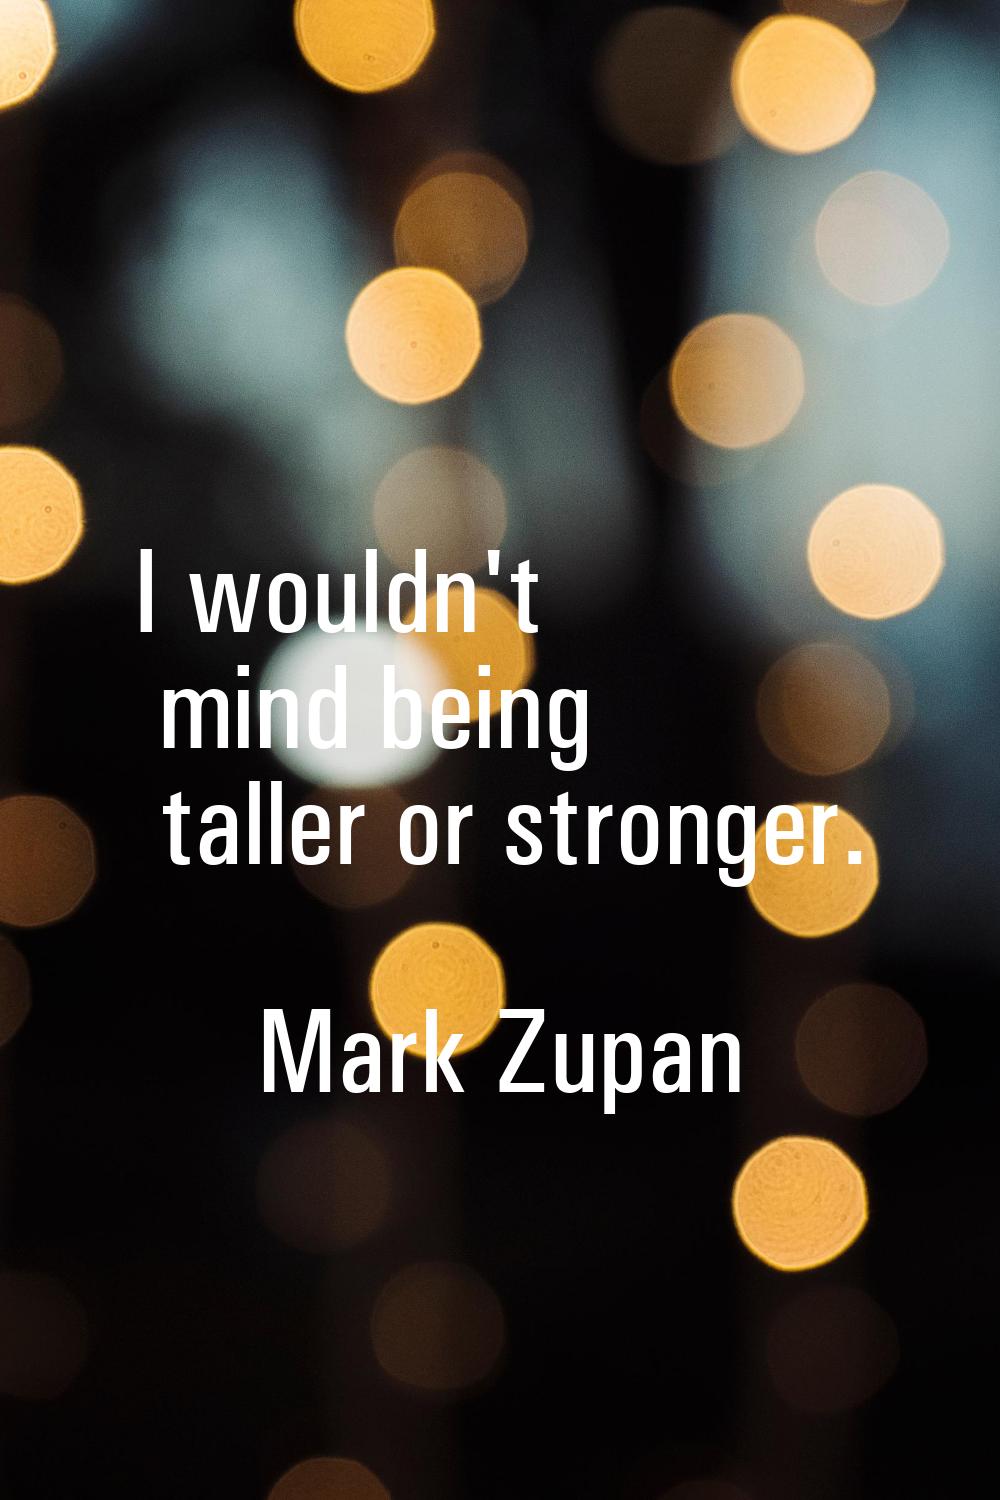 I wouldn't mind being taller or stronger.